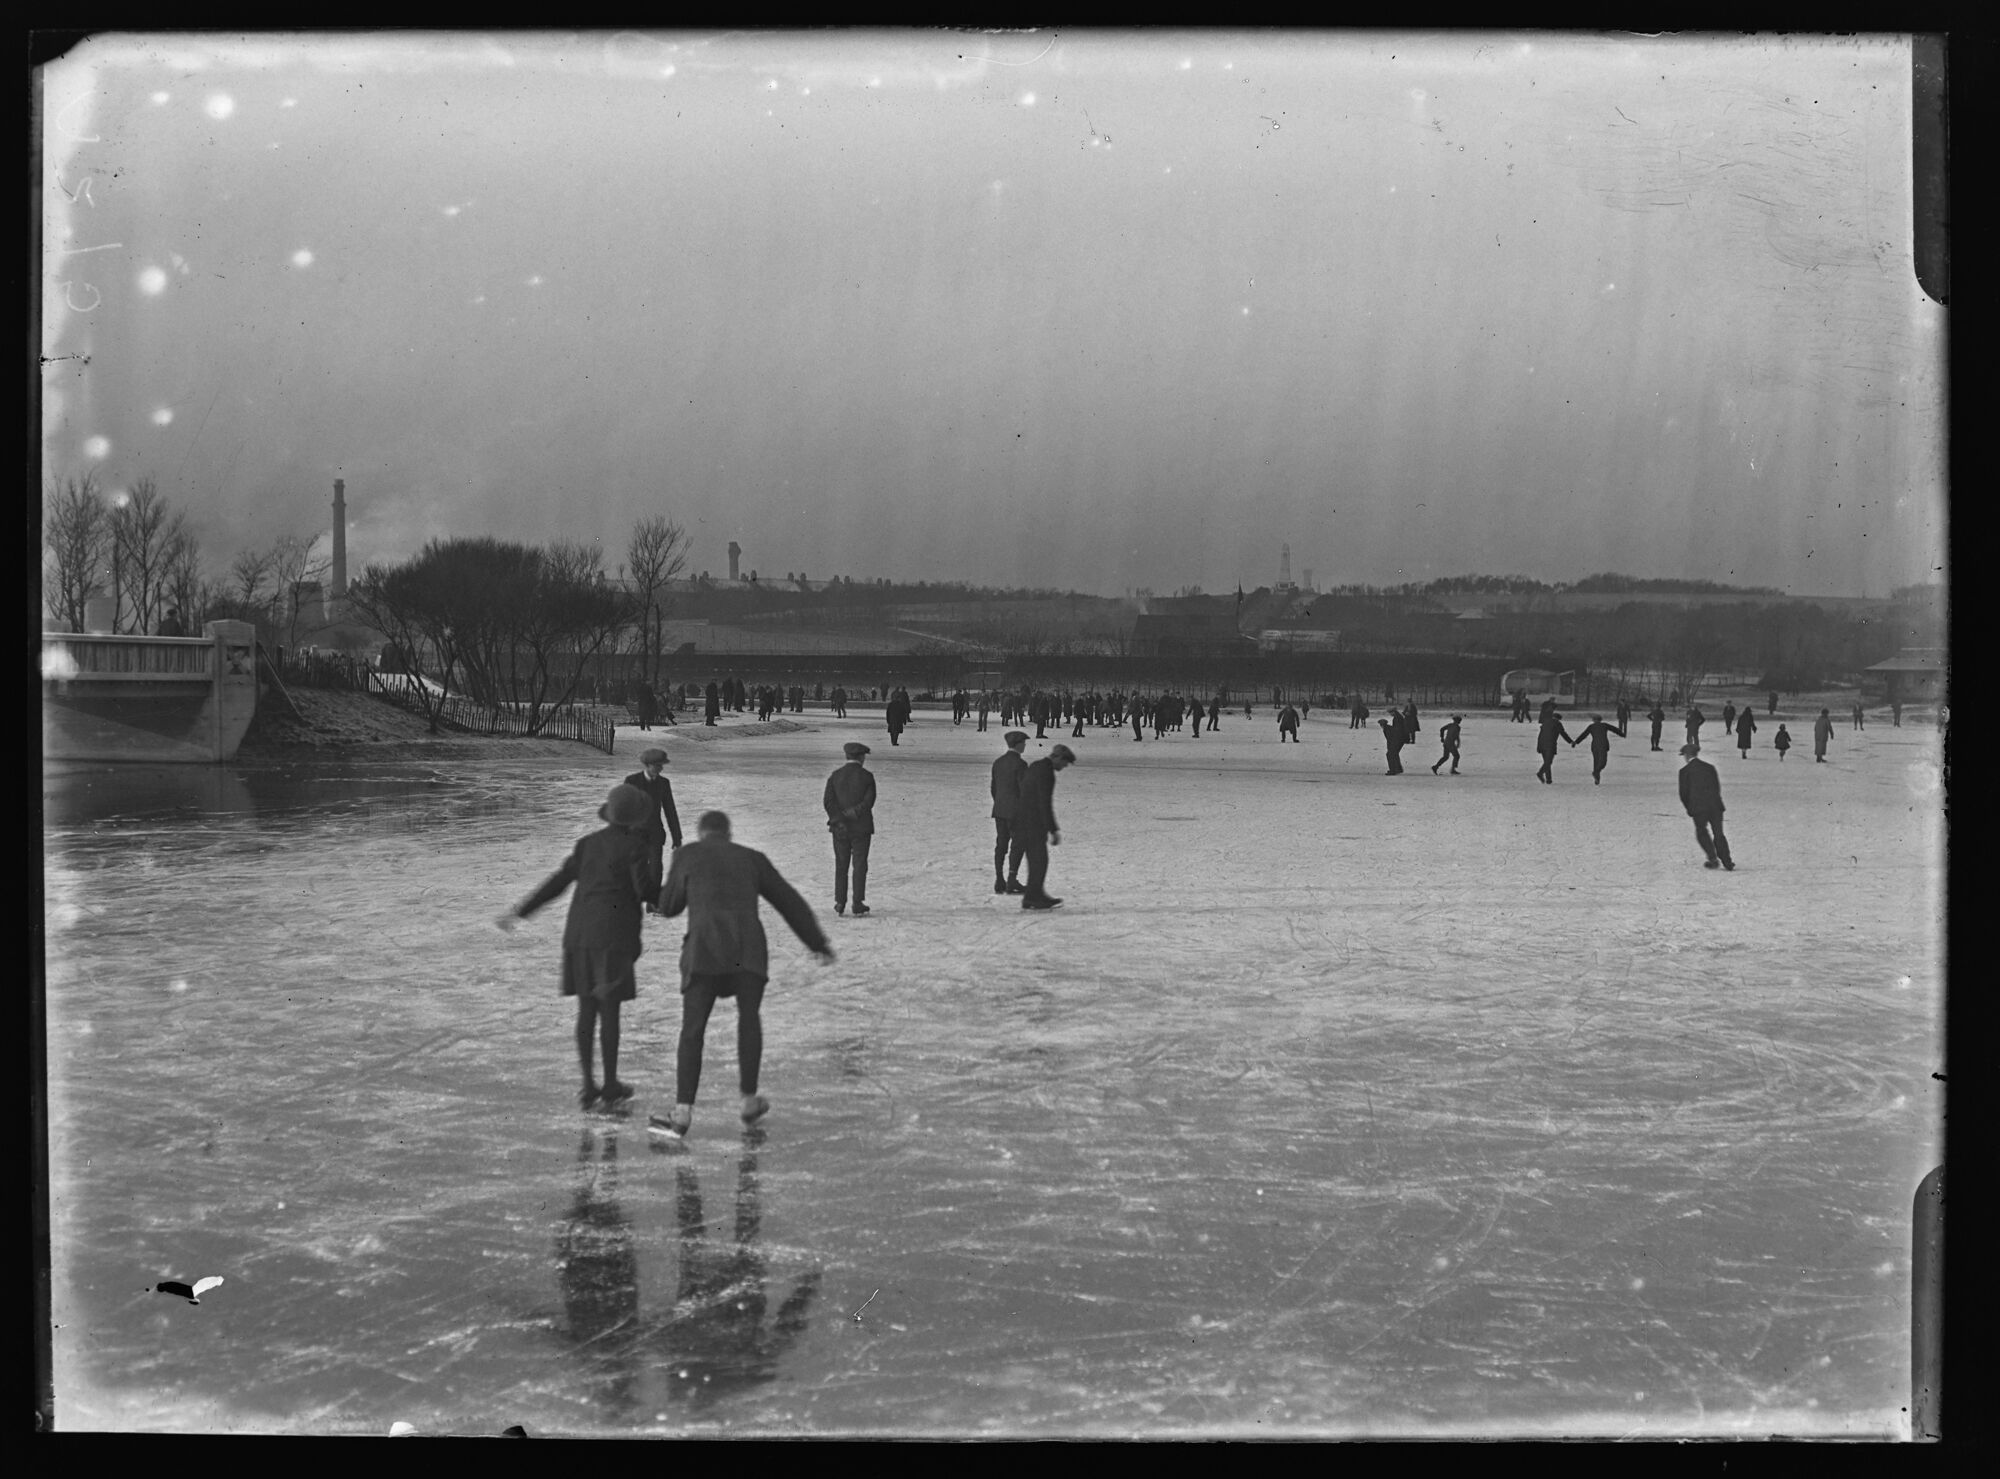 Skating on the Park Lake, Barrow-in-Furness 